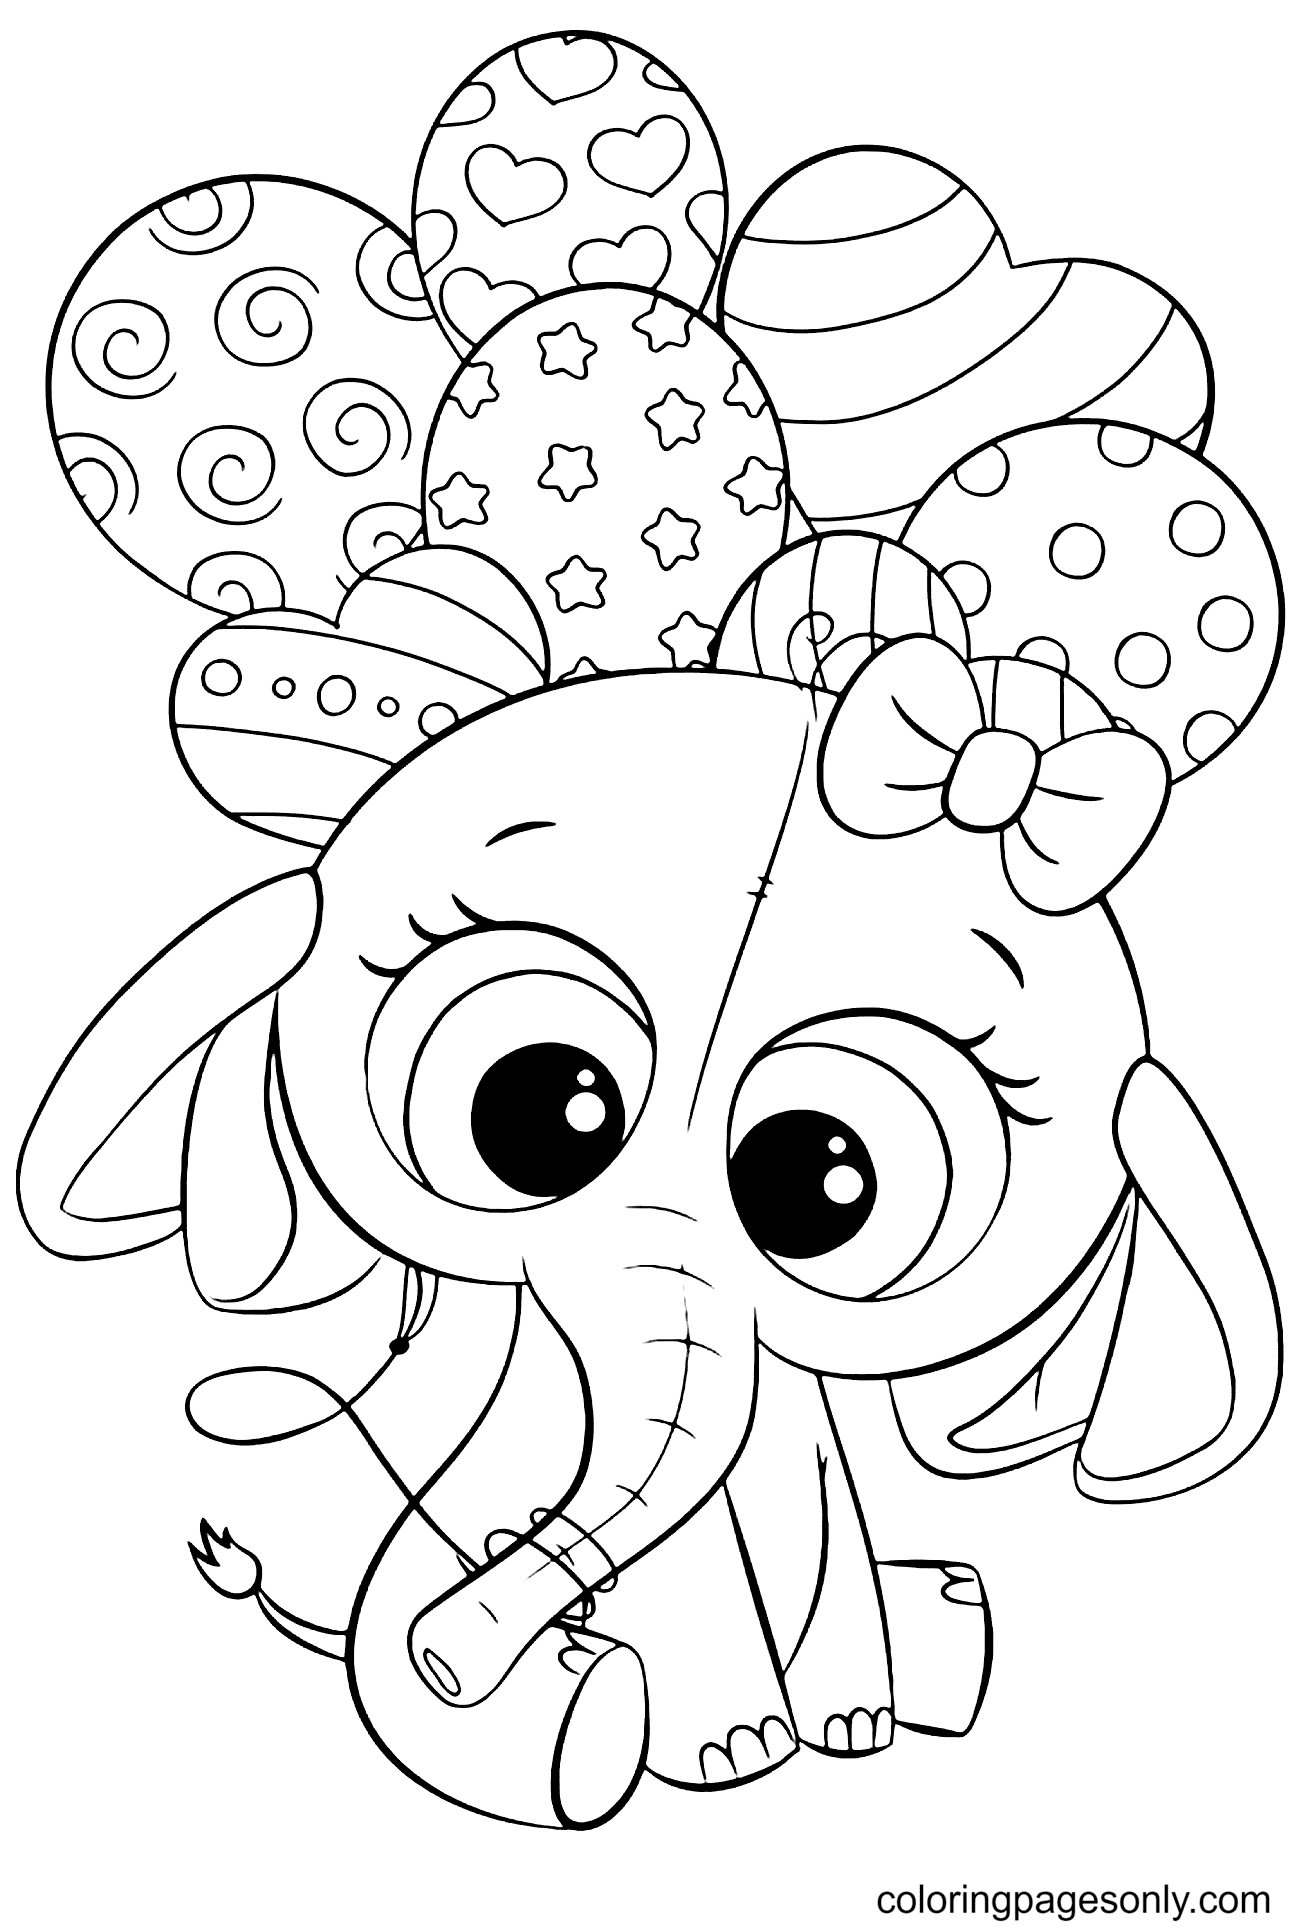 Elephant with Balloons Coloring Pages